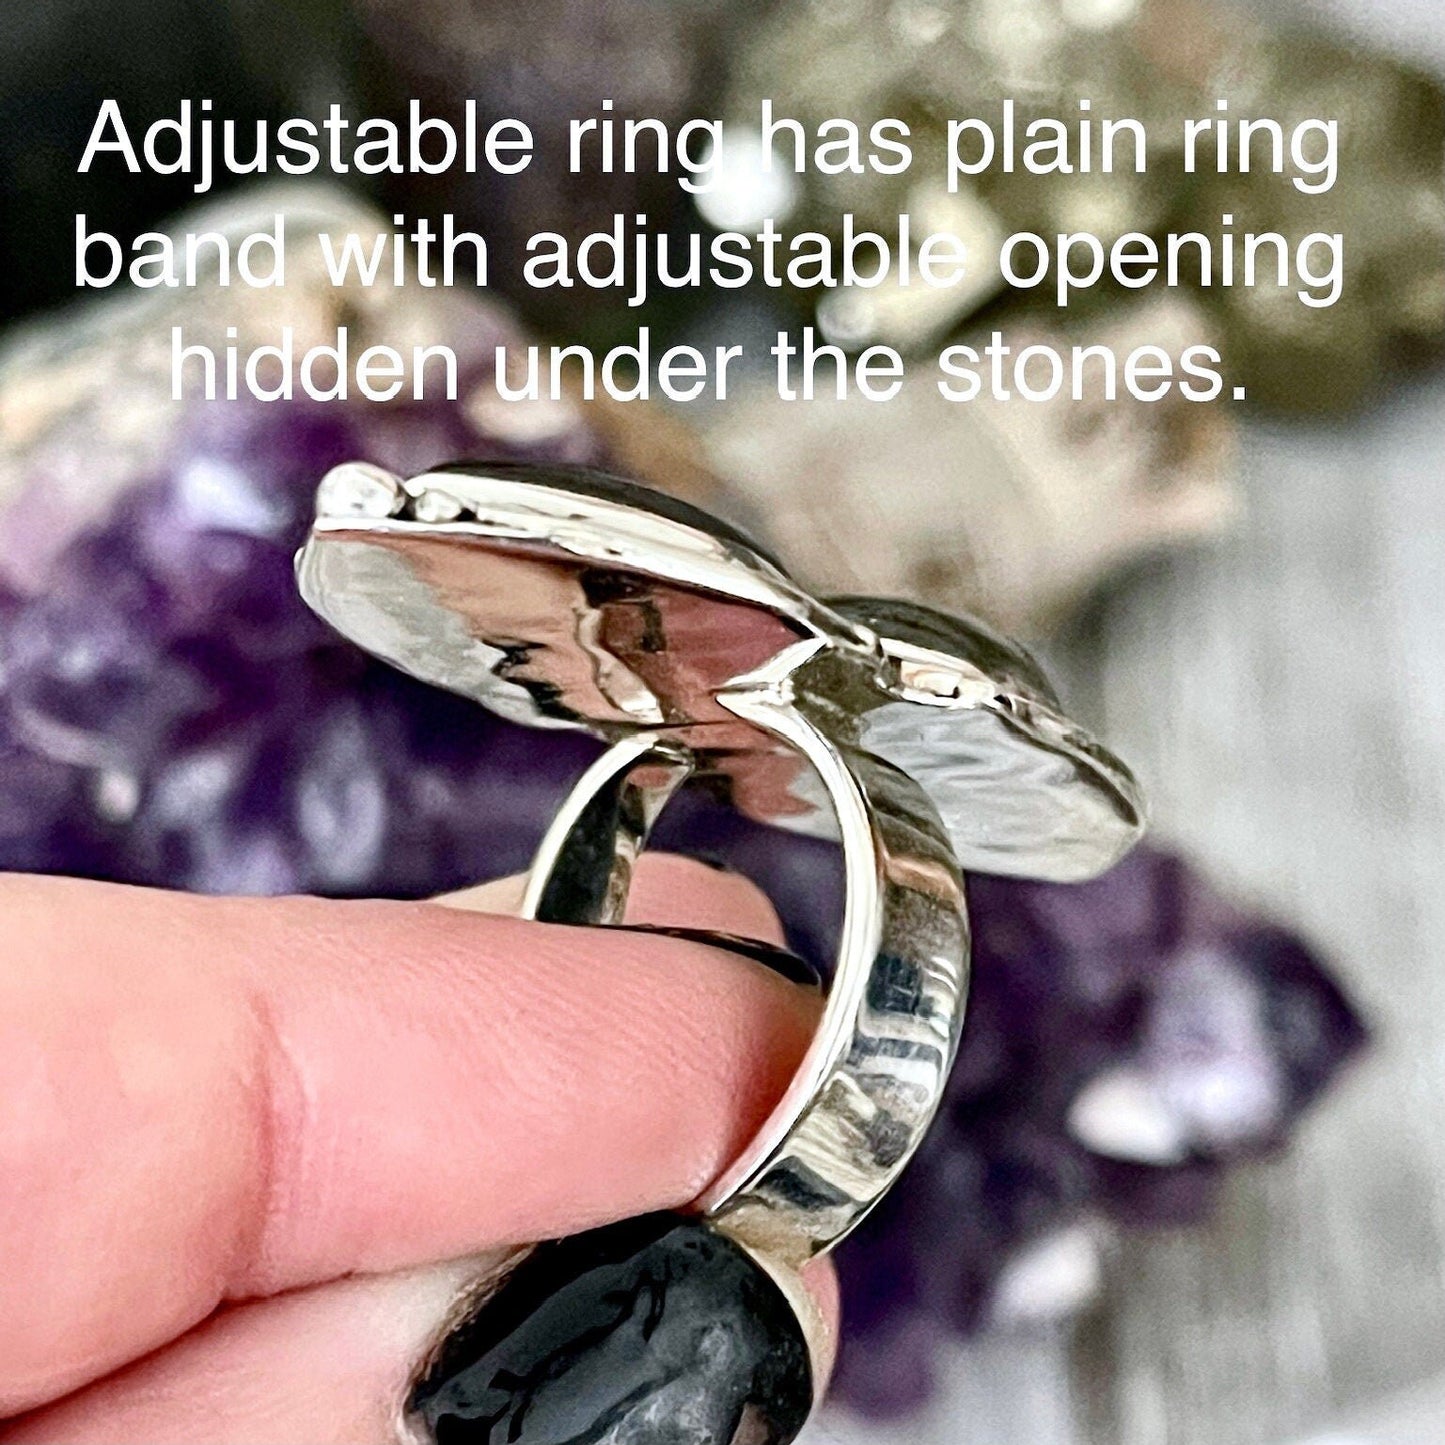 Mystic Moons Labradorite Crystal Ring Sterling Silver Designed FOXLARK Collection Size 6 7 8 9 10